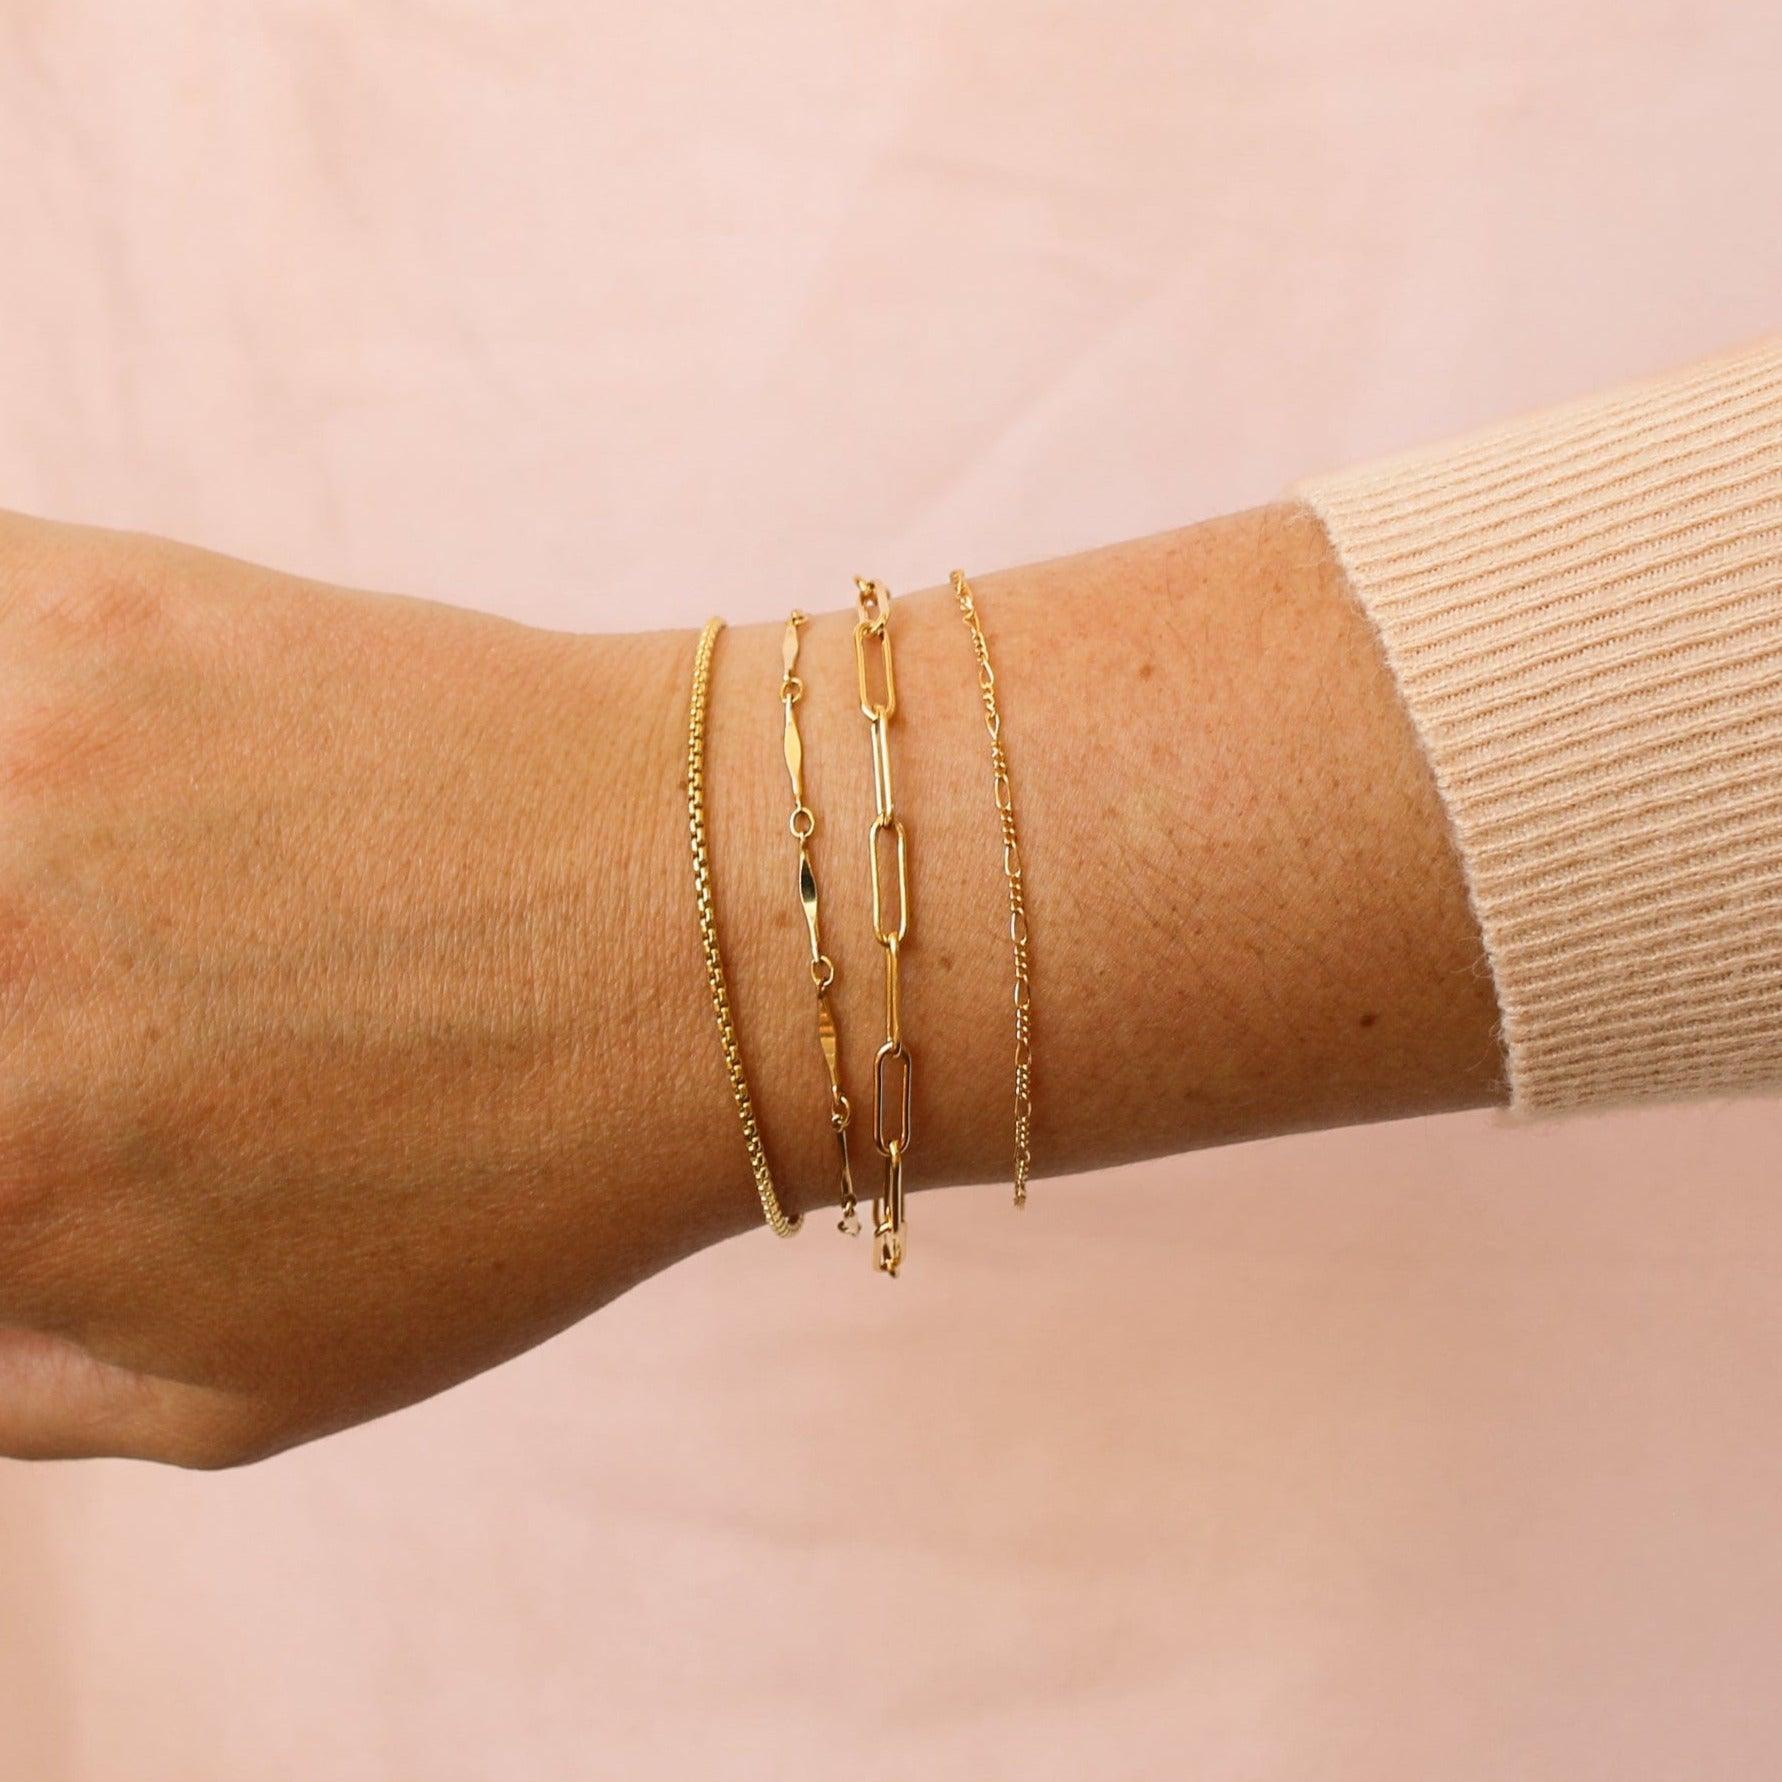 Box Chain Bracelet - Nolia Jewelry - Meaningful + Sustainably Handcrafted Jewelry